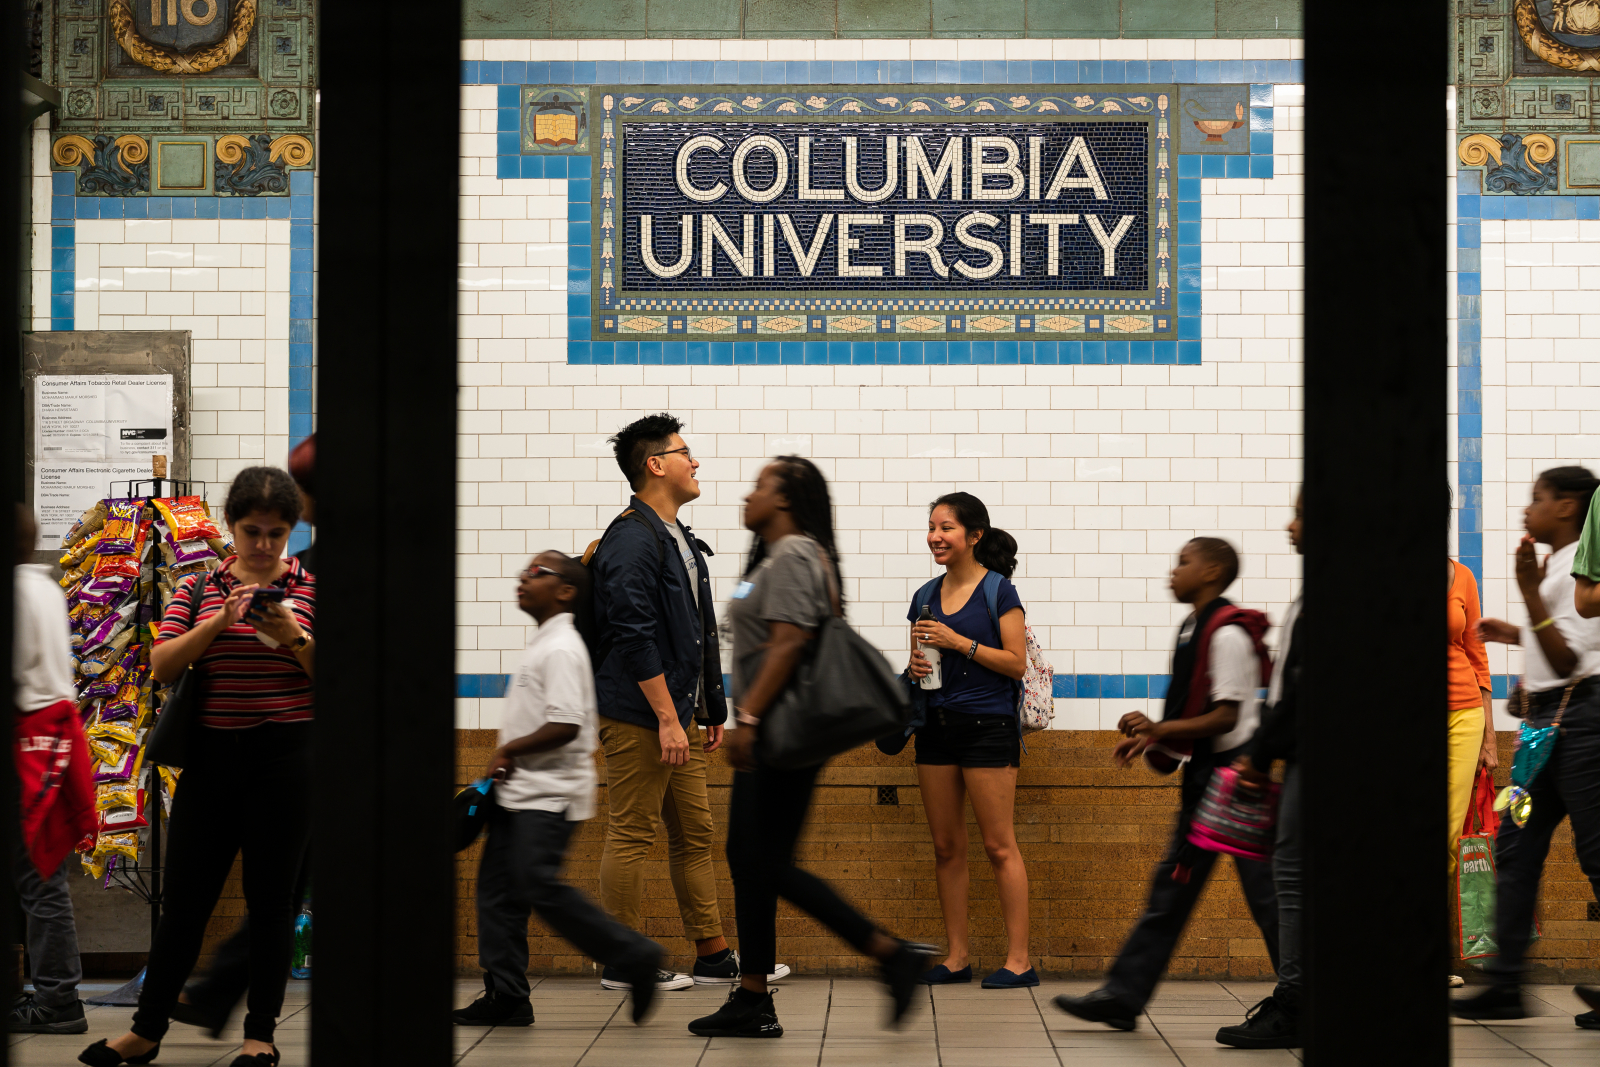 Students and locals walk on a busy subway platform. The tile on the wall reads "Columbia University"